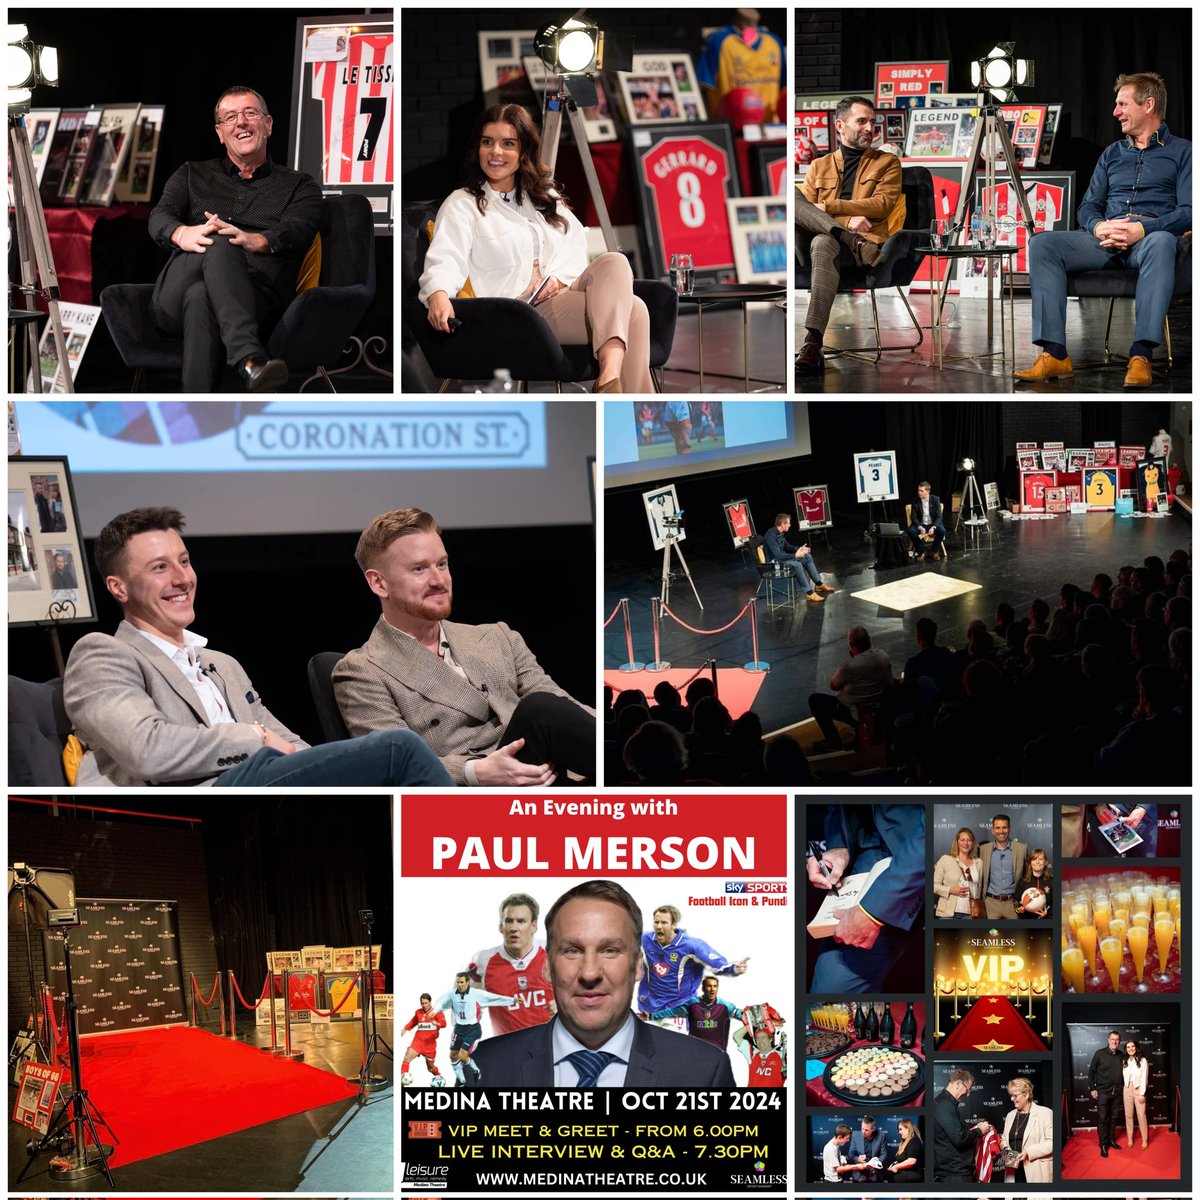 Few highlights celebrating our successful shows with football legends Francis Benali, Stuart Pearce, Matt Le Tissier and Corrie stars Mikey North & Ryan Prescott

We are excited about our next event with Paul Merson⚽🎊👇🏻
seamlessentertainment.co.uk/events

#newevent #paulmerson #football